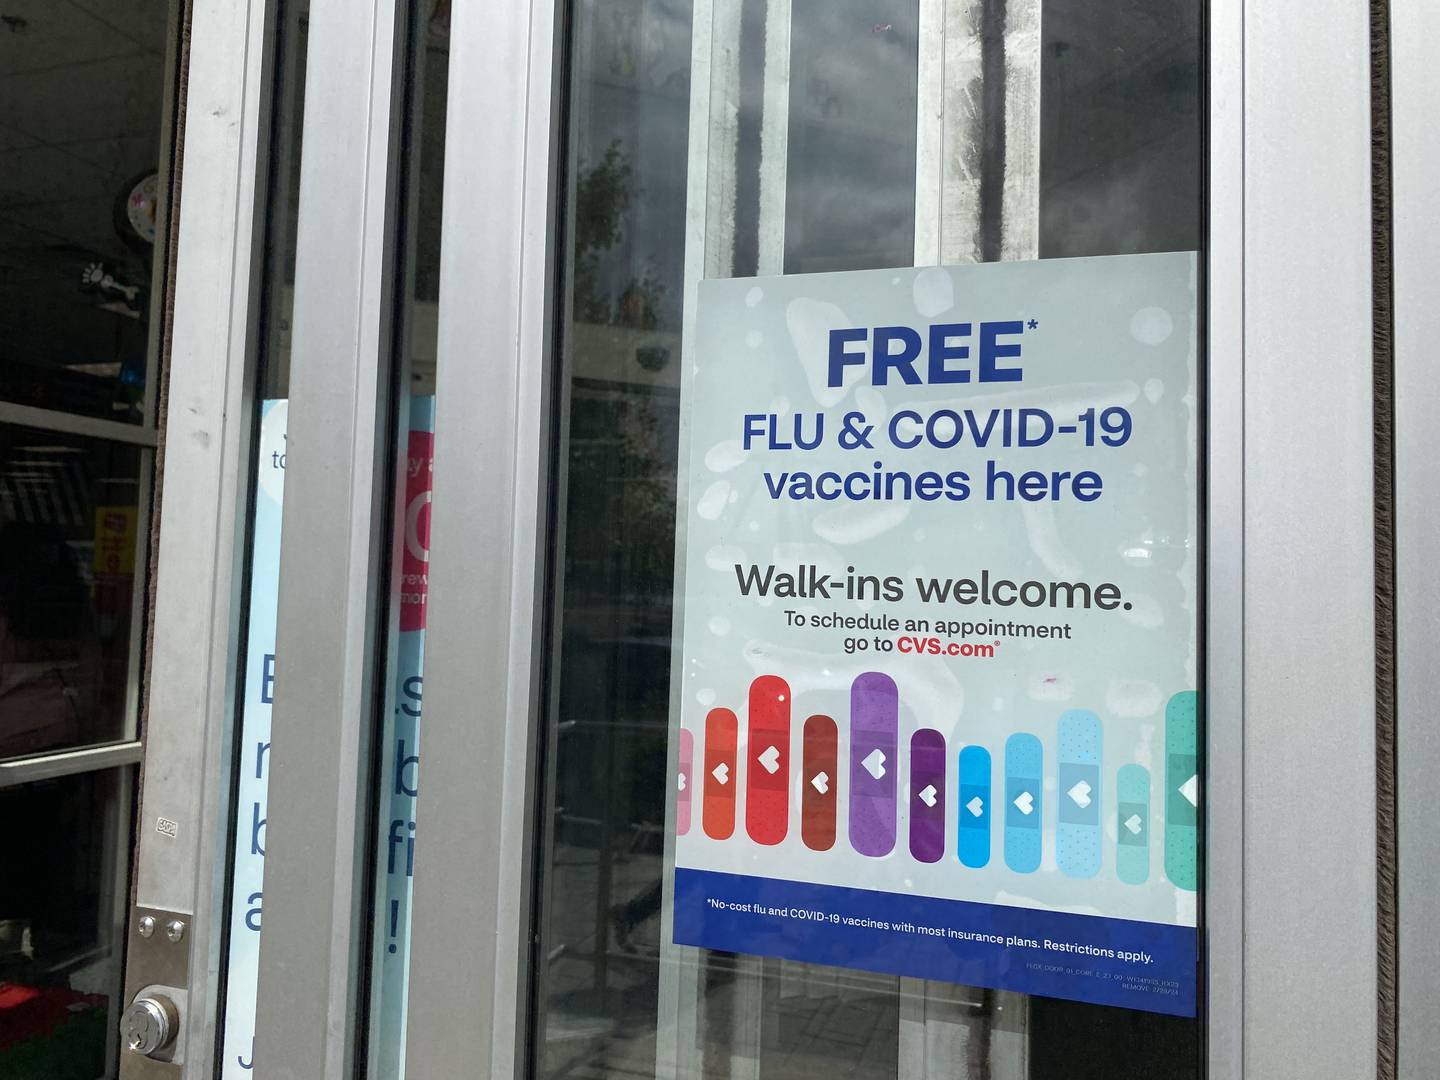 COVID-19 vaccines are advertised at pharmacies across the region, but they're in short supply.